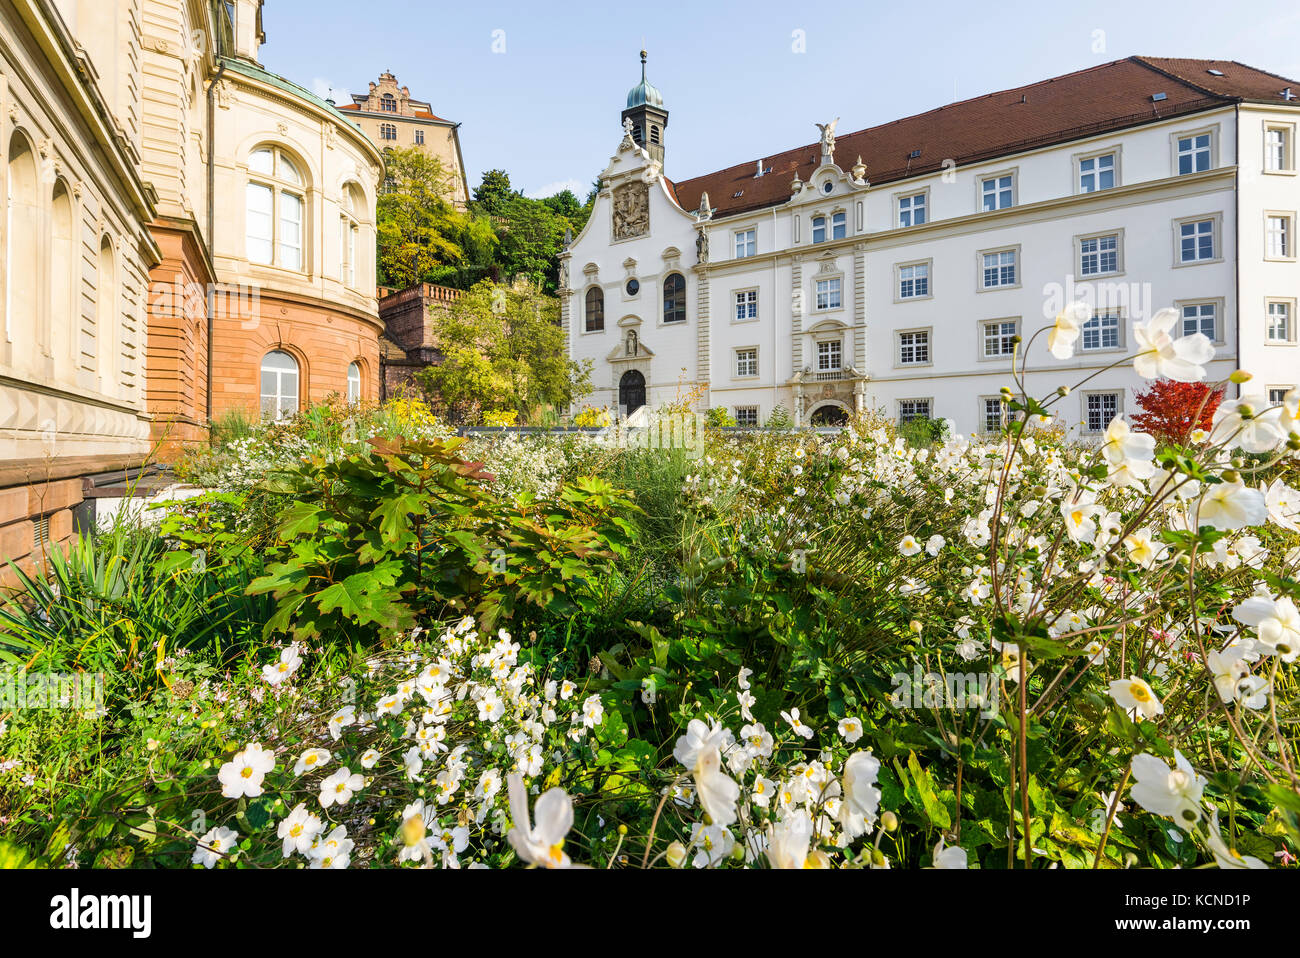 grammar school Klosterschule vom Heiligen Grab right, Friedrichsbad Therme on the left and the new castle above in the spa town Baden-Baden, Germany Stock Photo